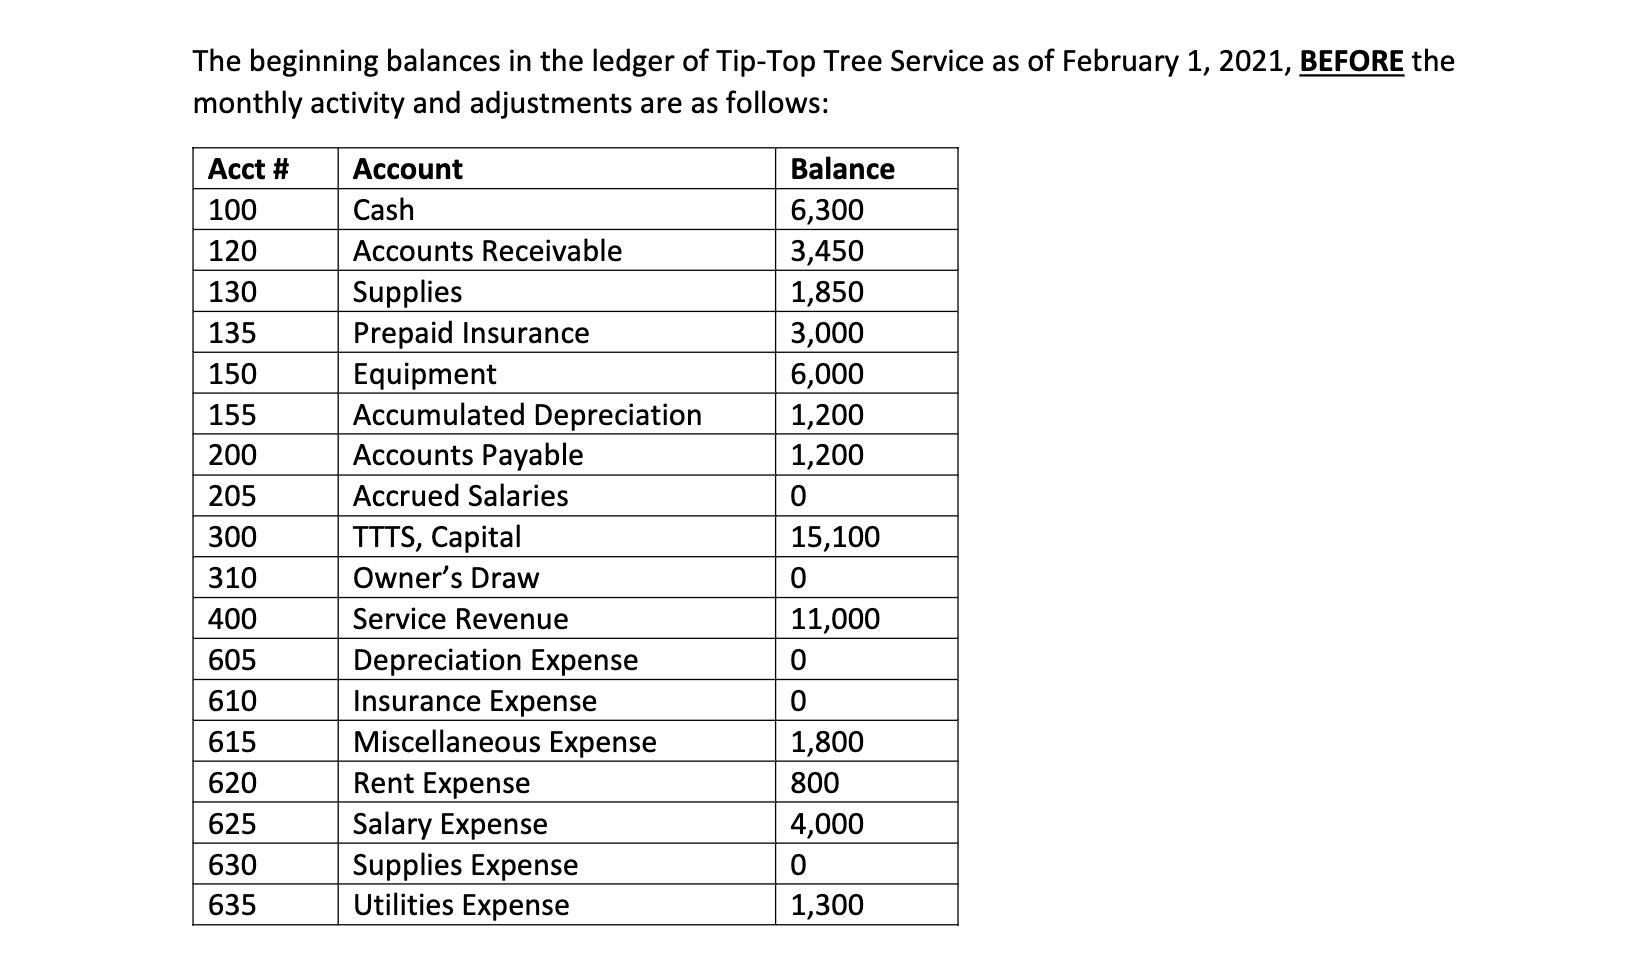 The beginning balances in the ledger of Tip-Top Tree Service as of February 1, 2021, BEFORE the monthly activity and adjustme